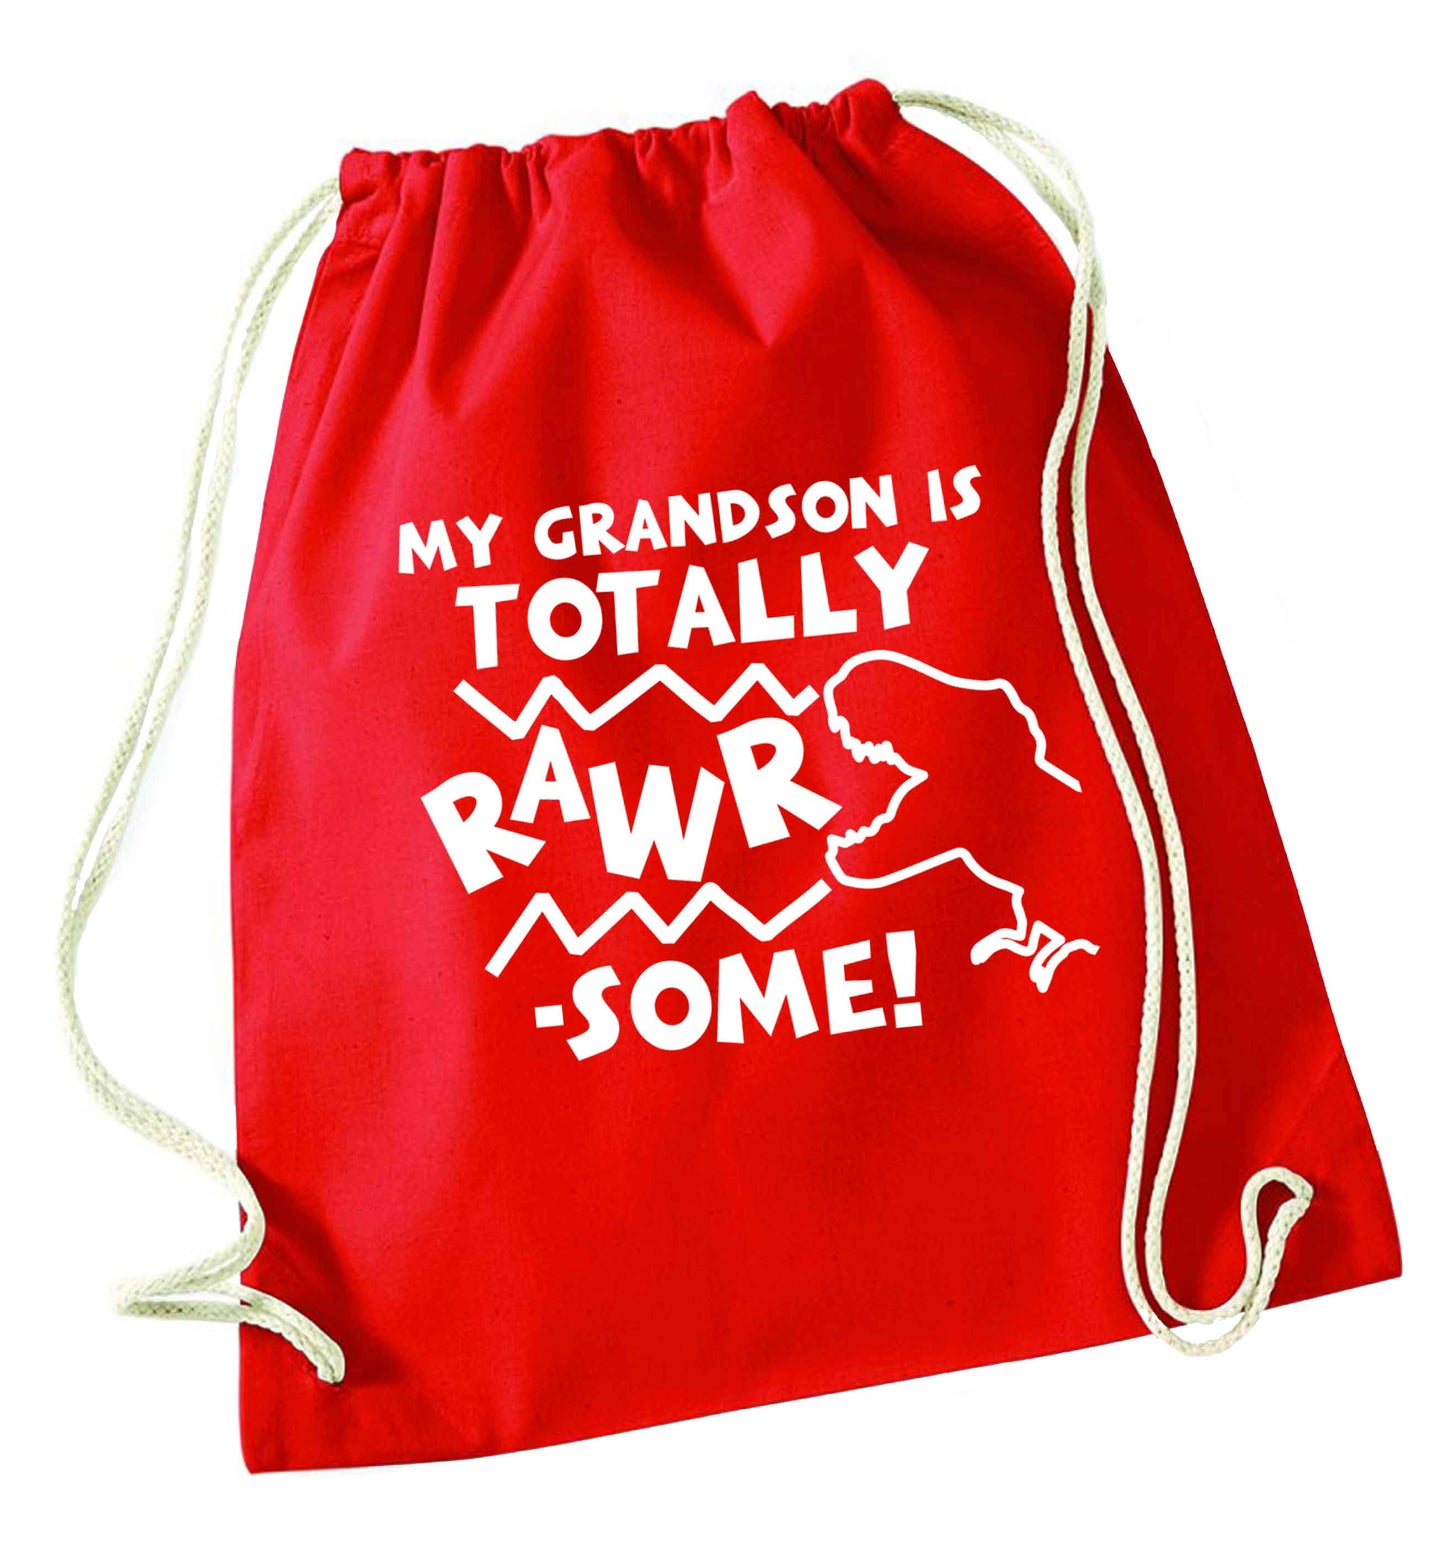 My grandson is totally rawrsome red drawstring bag 